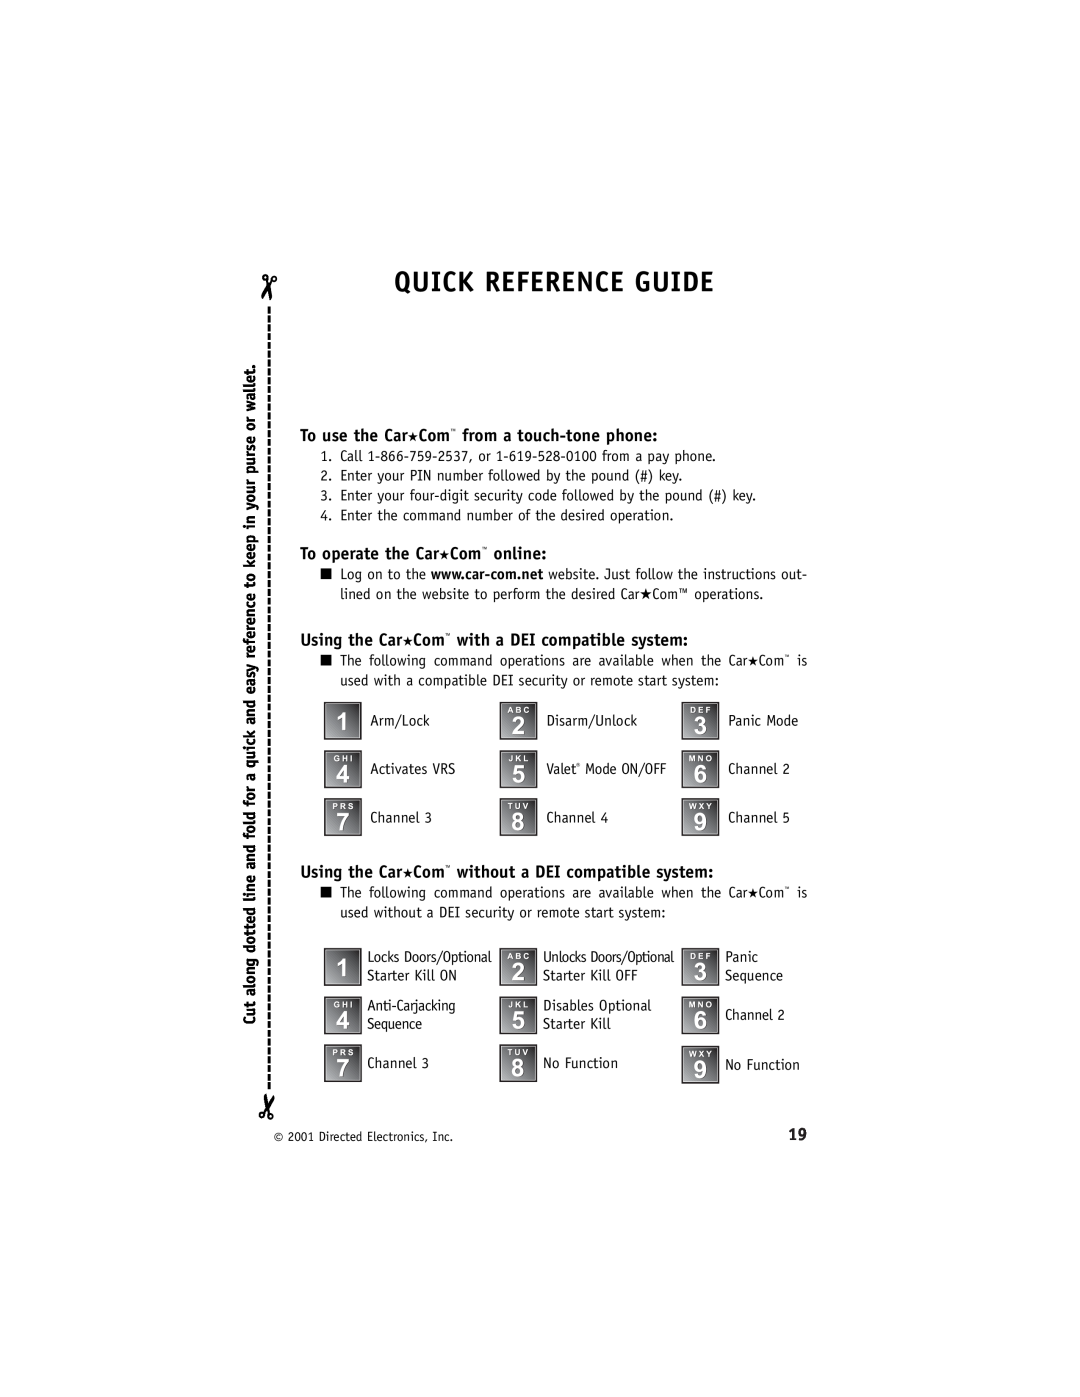 Directed Electronics Model 400 Quick Reference Guide, PIN Number, To use the CarCom from a touch-tonephone, Cut along 